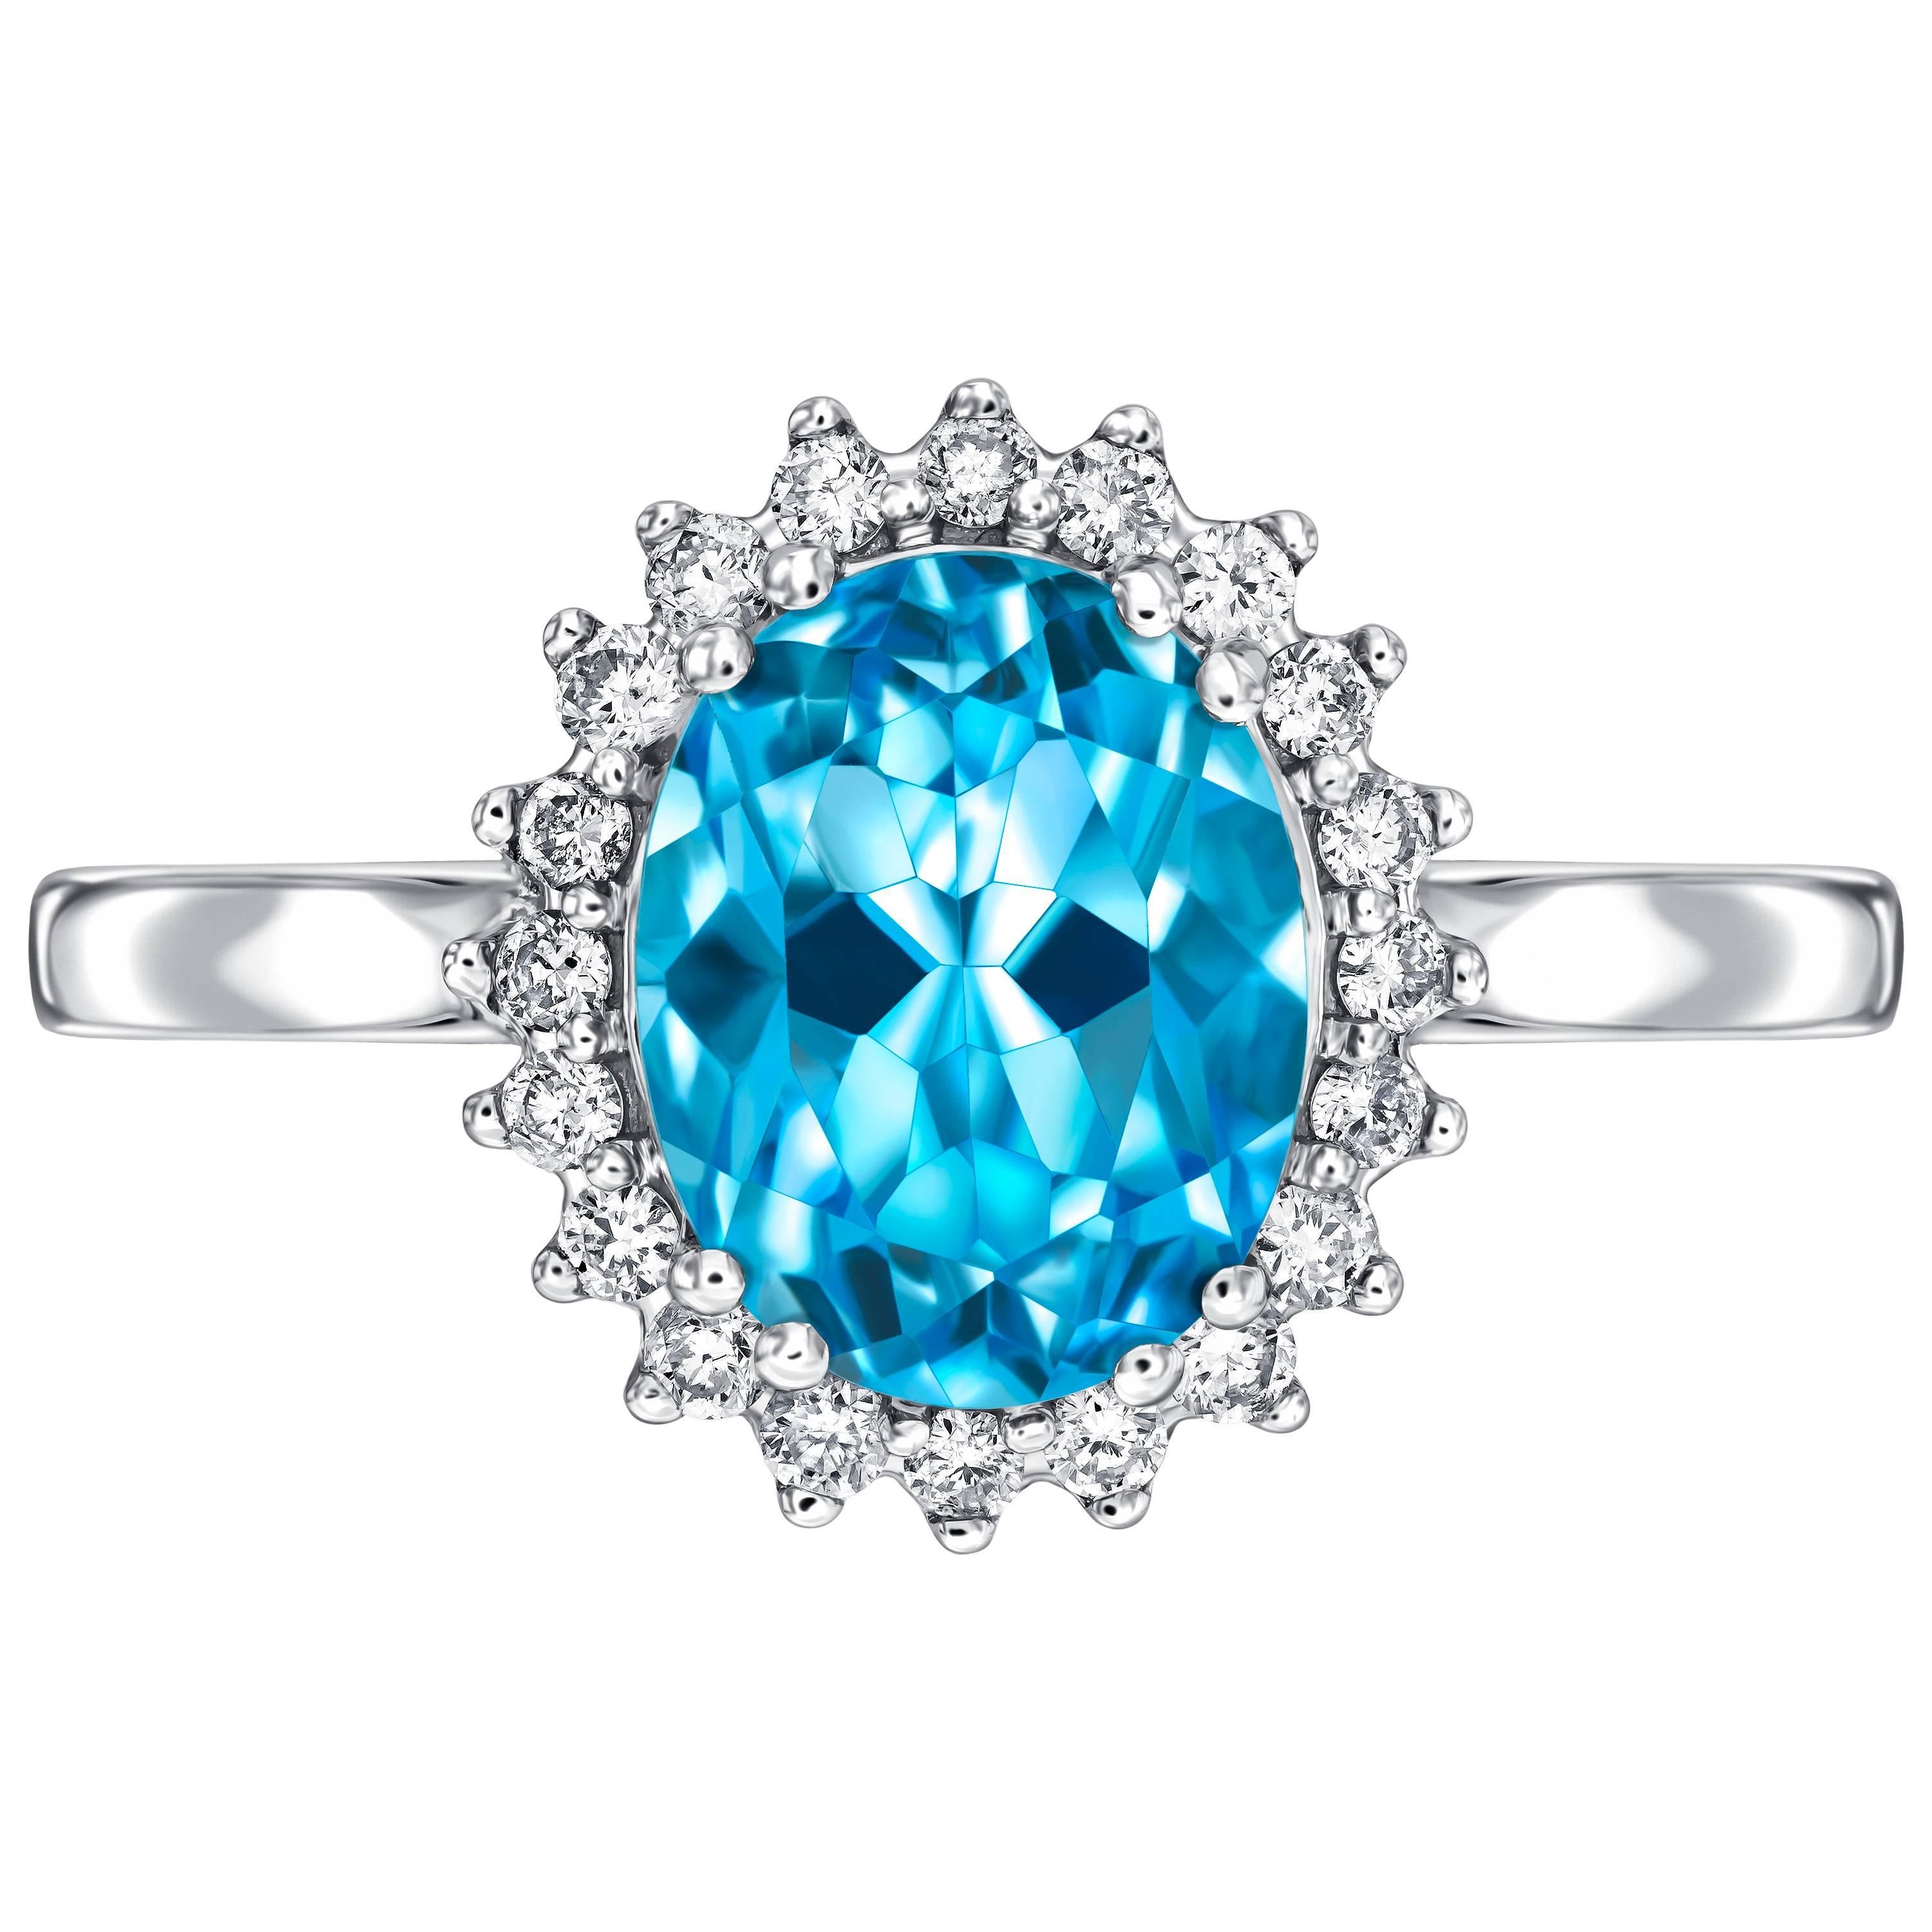 Vintage classic design 18 Karat white gold ring with 2.20 Carat blue topaz centrepiece and a cluster of 0.20 Carat white colour H and eye clean clarity SI natural diamonds. Each diamond on the halo is set with 3 claws for a sparkly star effect look.